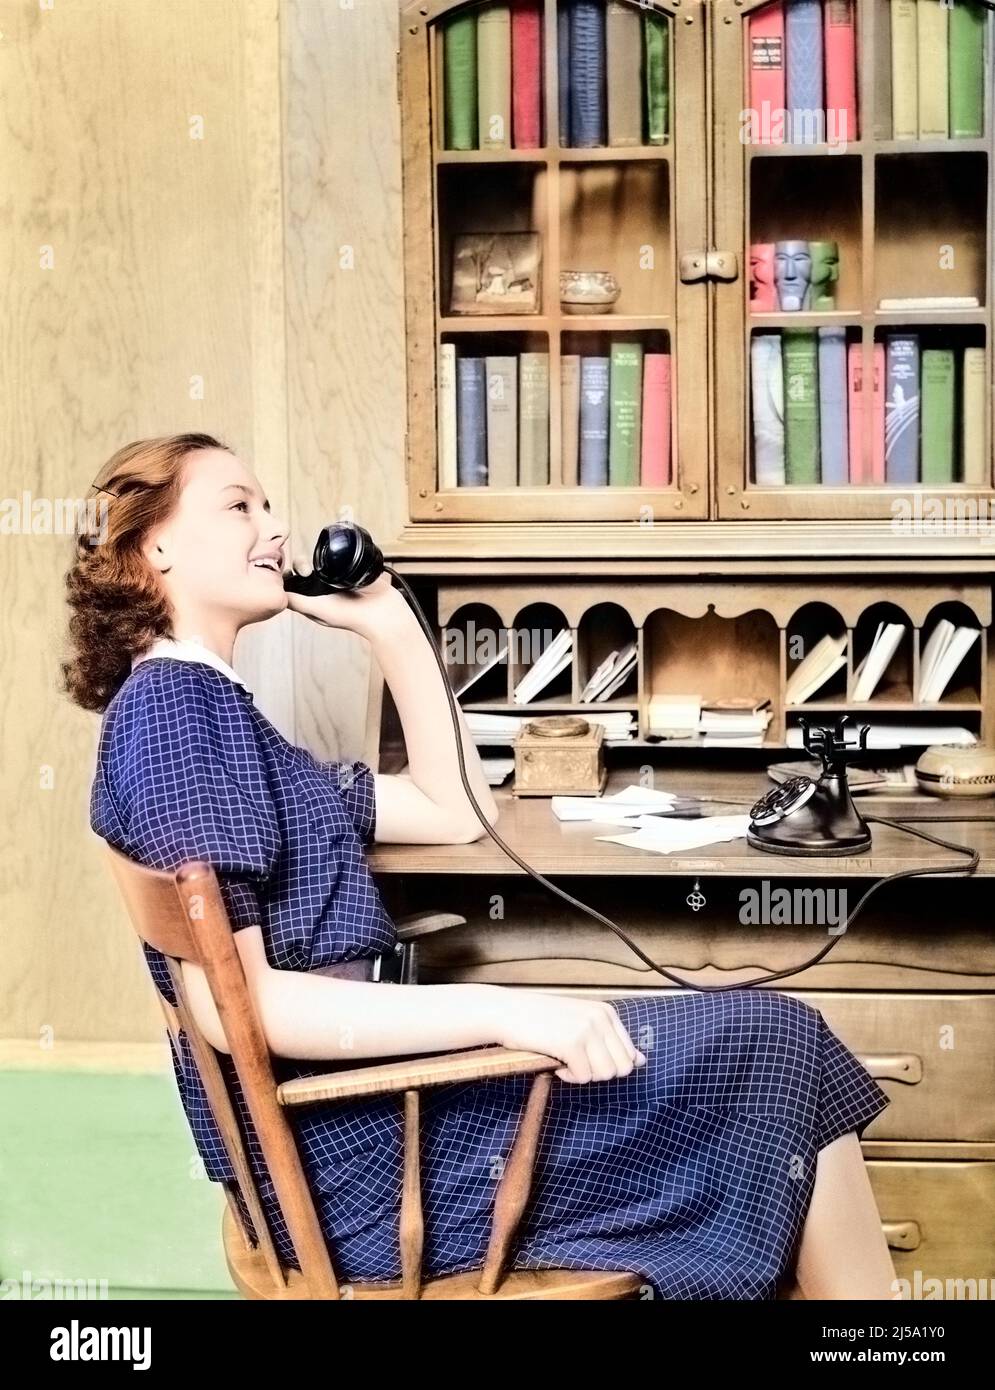 1930s 1940s TEENAGE GIRL SITTING AT DESK TALKING ON OLD BLACK ROTARY DIAL PHONE - t5280c HAR001 HARS STYLISH BOOKCASE ROTARY CAUCASIAN ETHNICITY HAR001 OLD FASHIONED Stock Photo